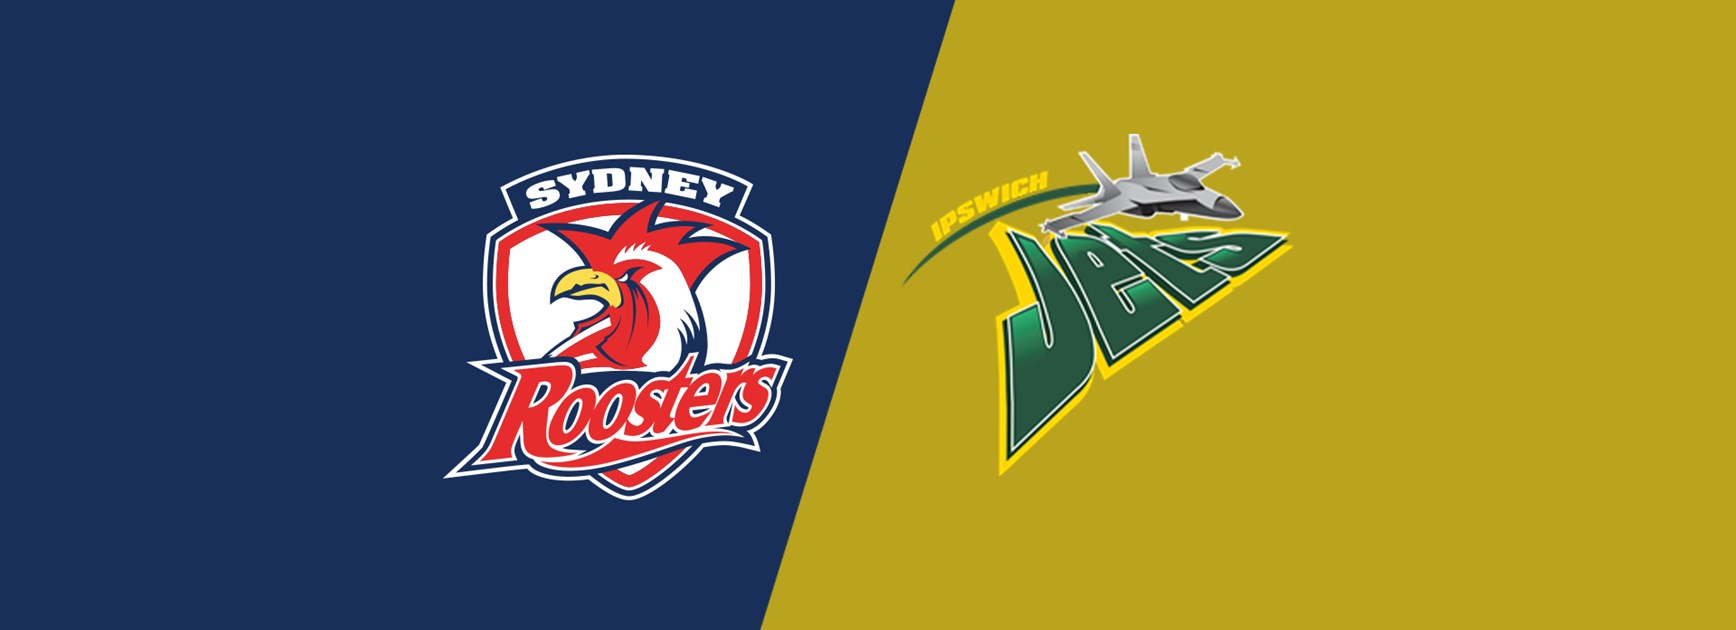 Sydney Roosters Form Pathway Partnership with Ipswich Jets